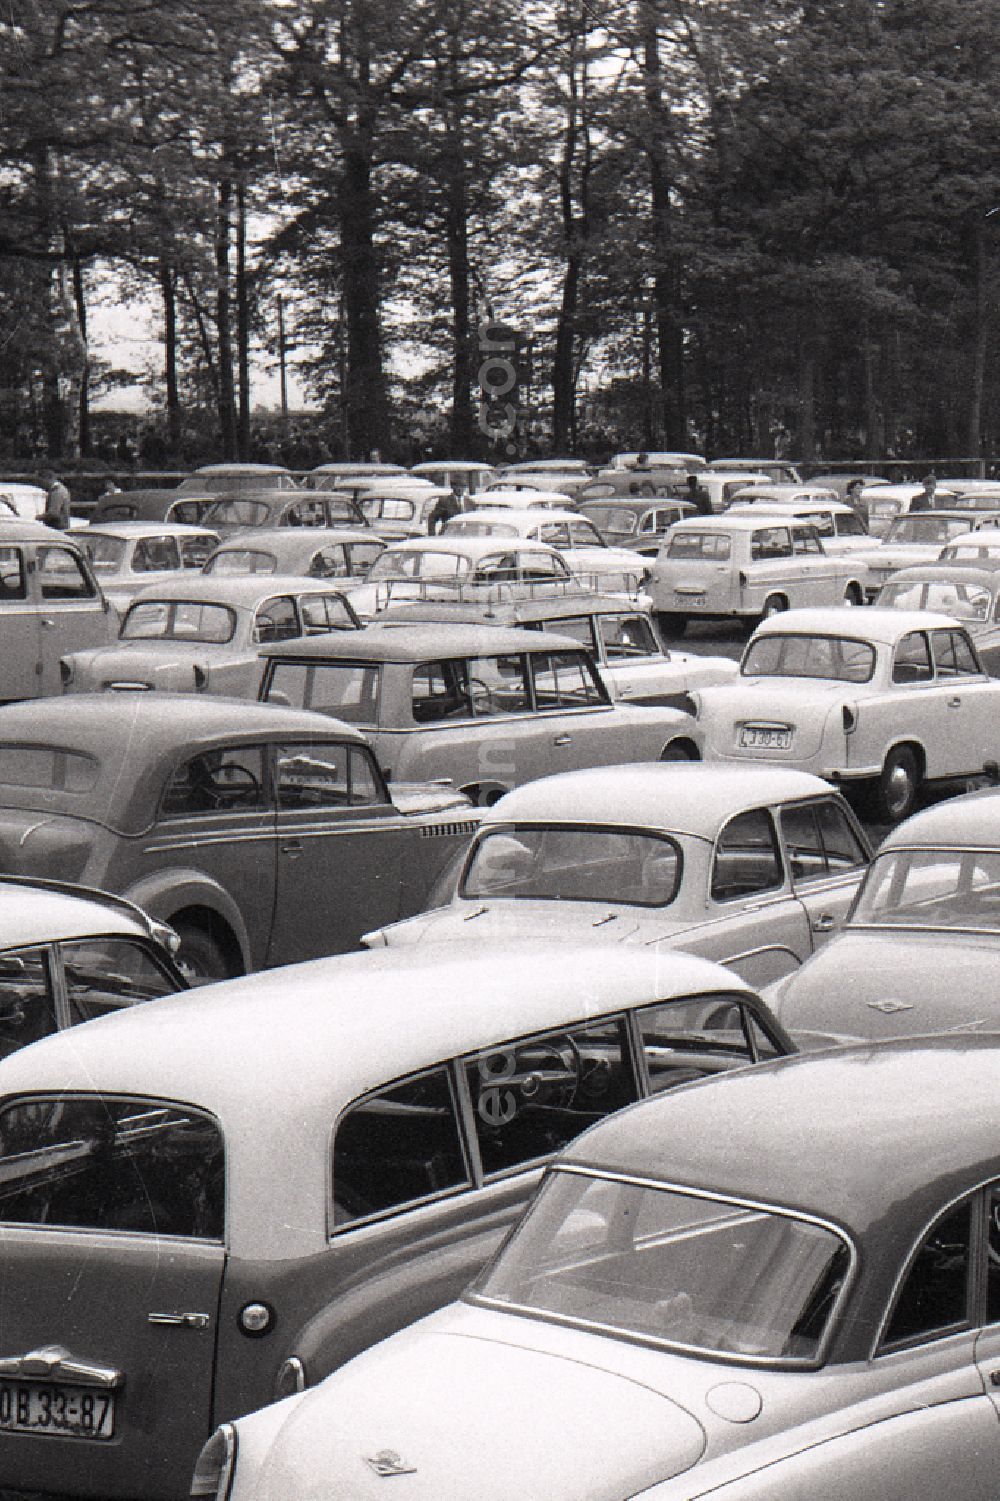 GDR picture archive: Gotha - Cars in a parking lot in Gotha in the state Thuringia on the territory of the former GDR, German Democratic Republic